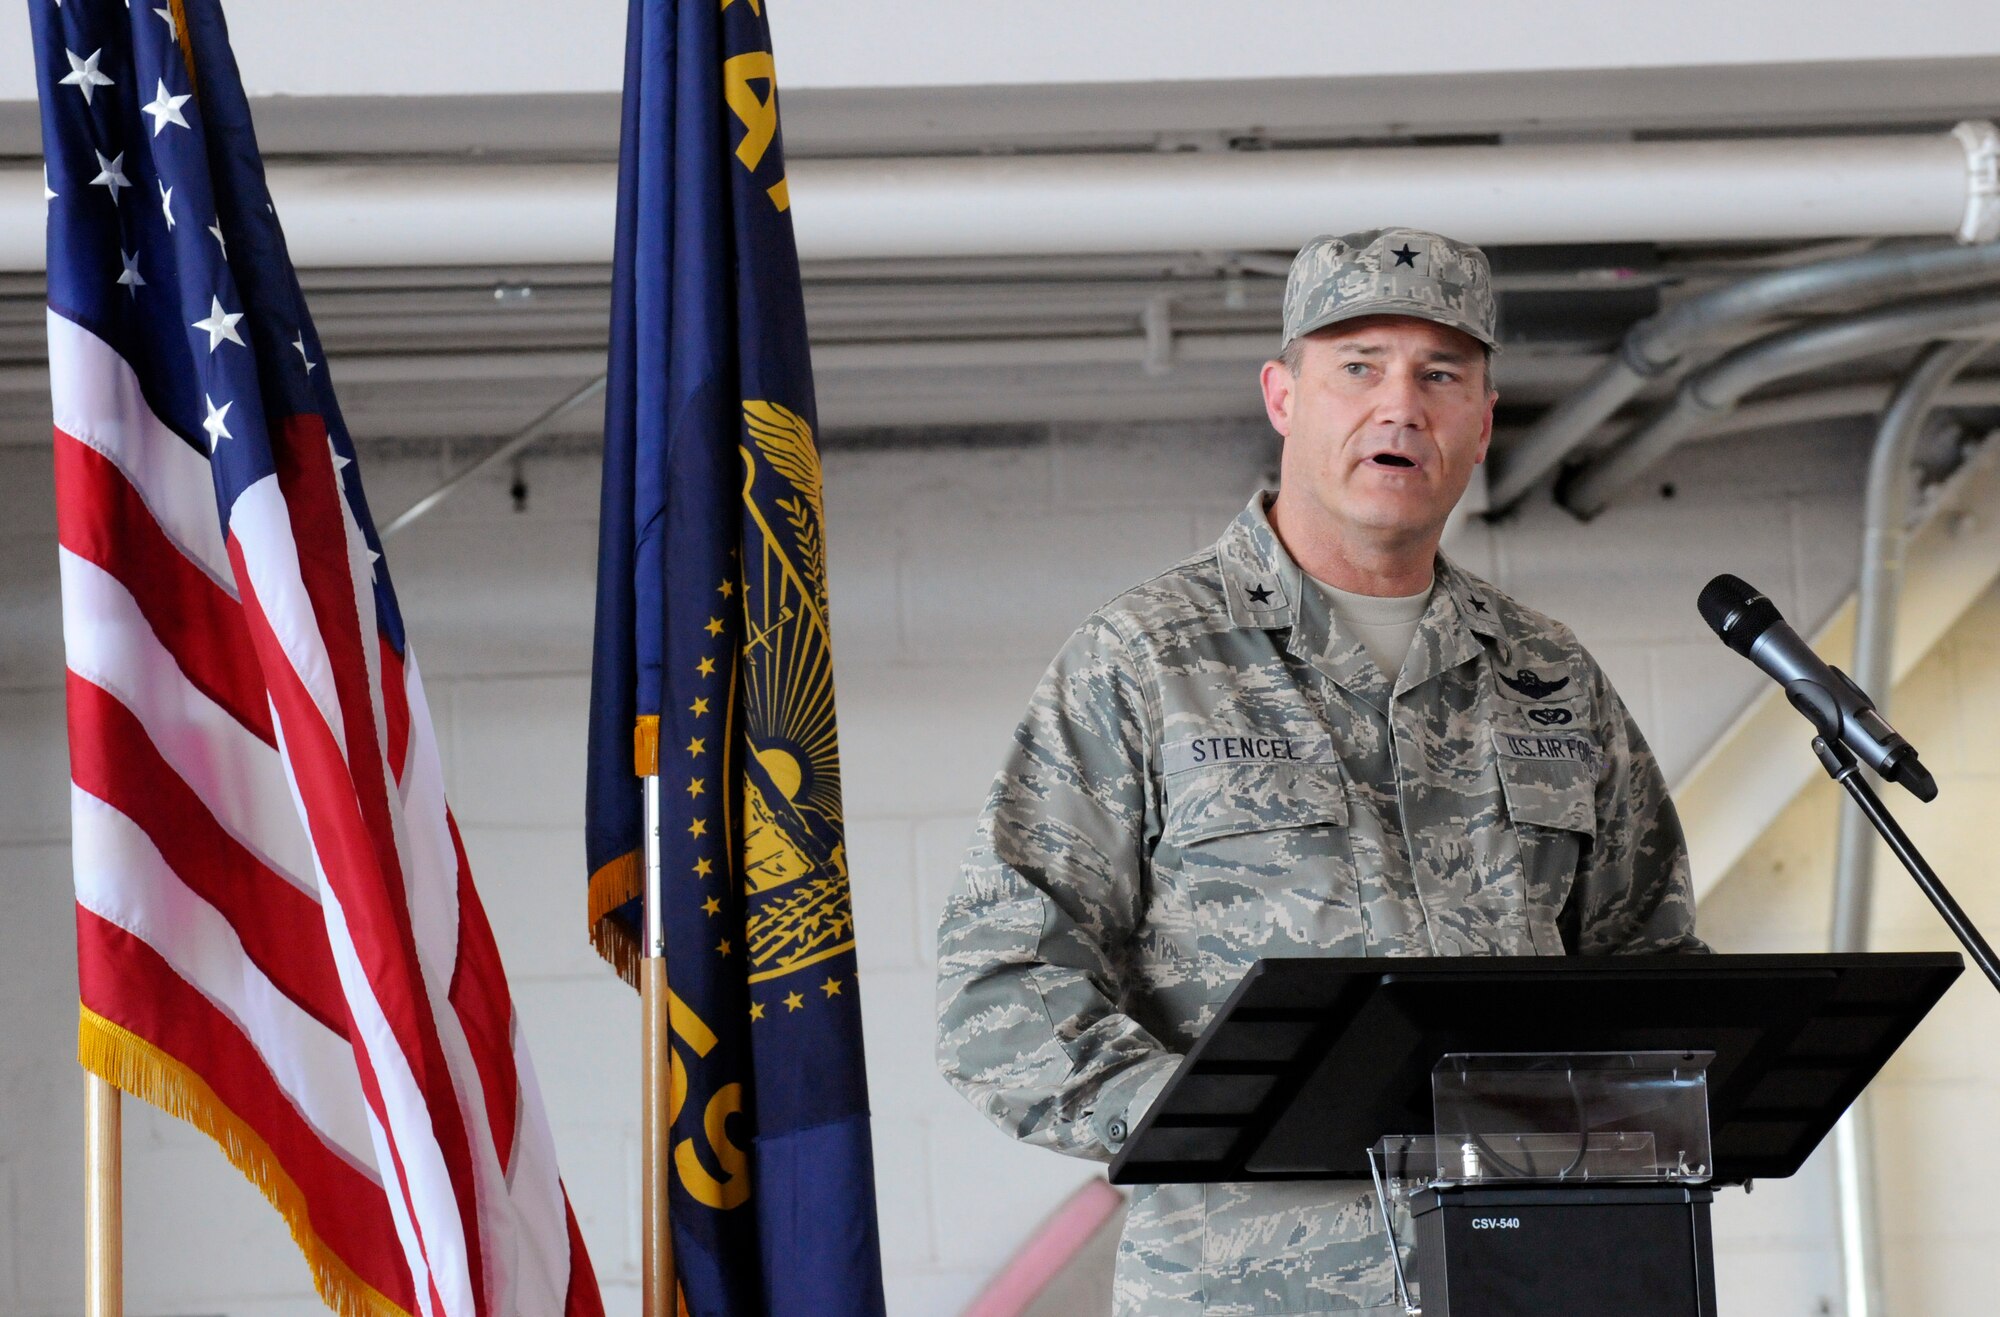 Air National Guard Brig. Gen. Michael Stencel, Oregon Air National Guard commander, addresses members of the 142nd Fighter Wing and family members during the formal mobilization ceremony, June 26, 2015, Portland Air National Guard Base, Ore. (U.S. Air National Guard photo by Tech. Sgt. John Hughel, 142nd Fighter Wing Public Affairs/Released)